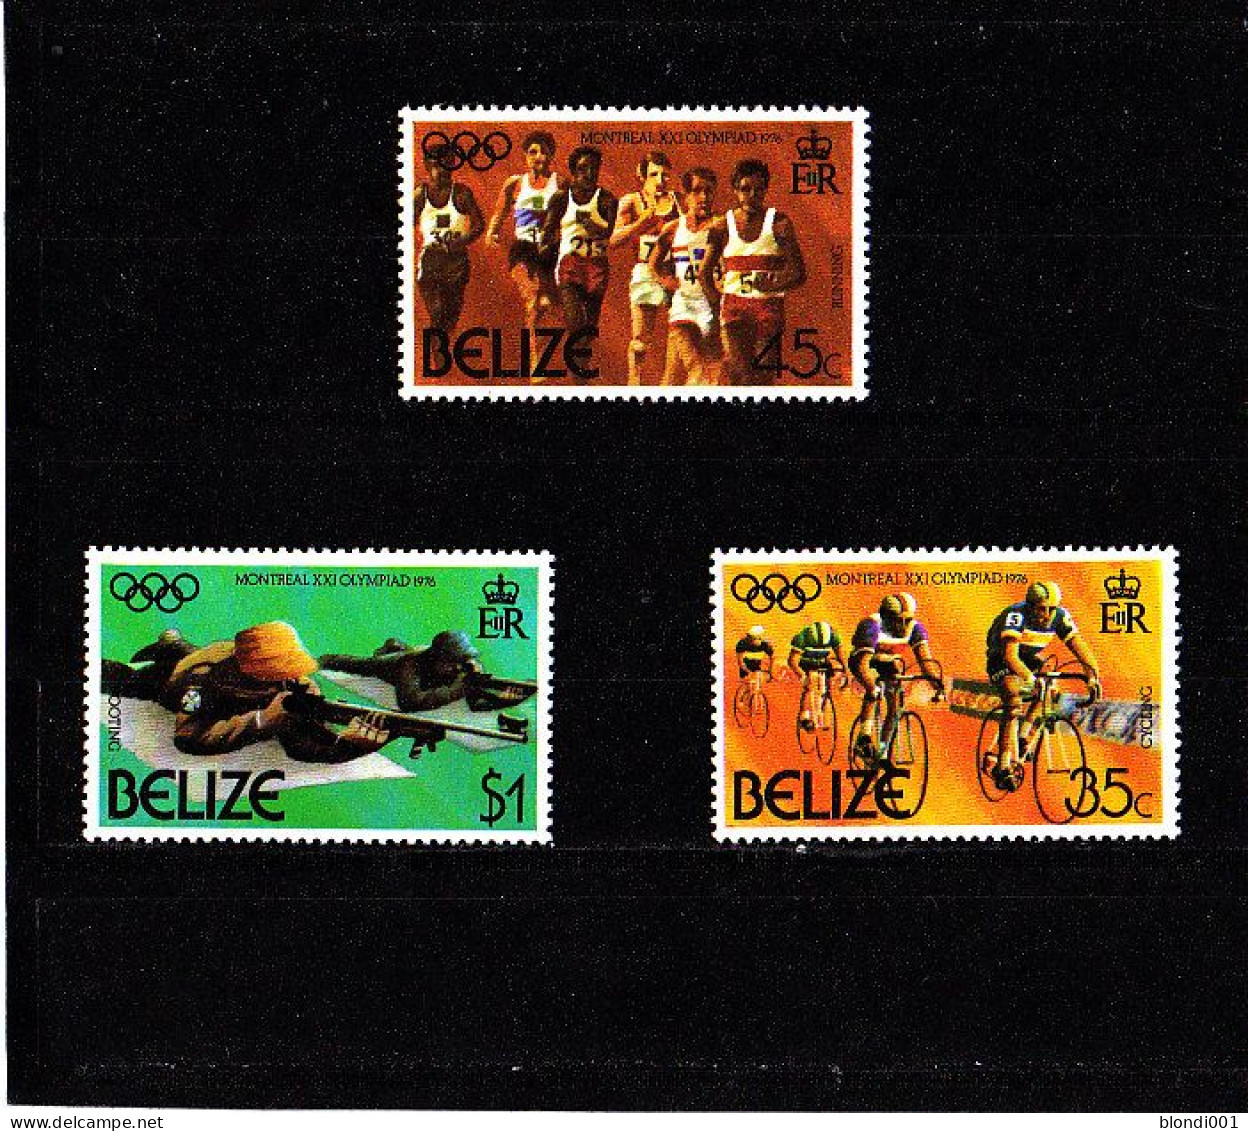 Olympics 1976 - Cycling - BELIZE -Set MNH - Sommer 1976: Montreal